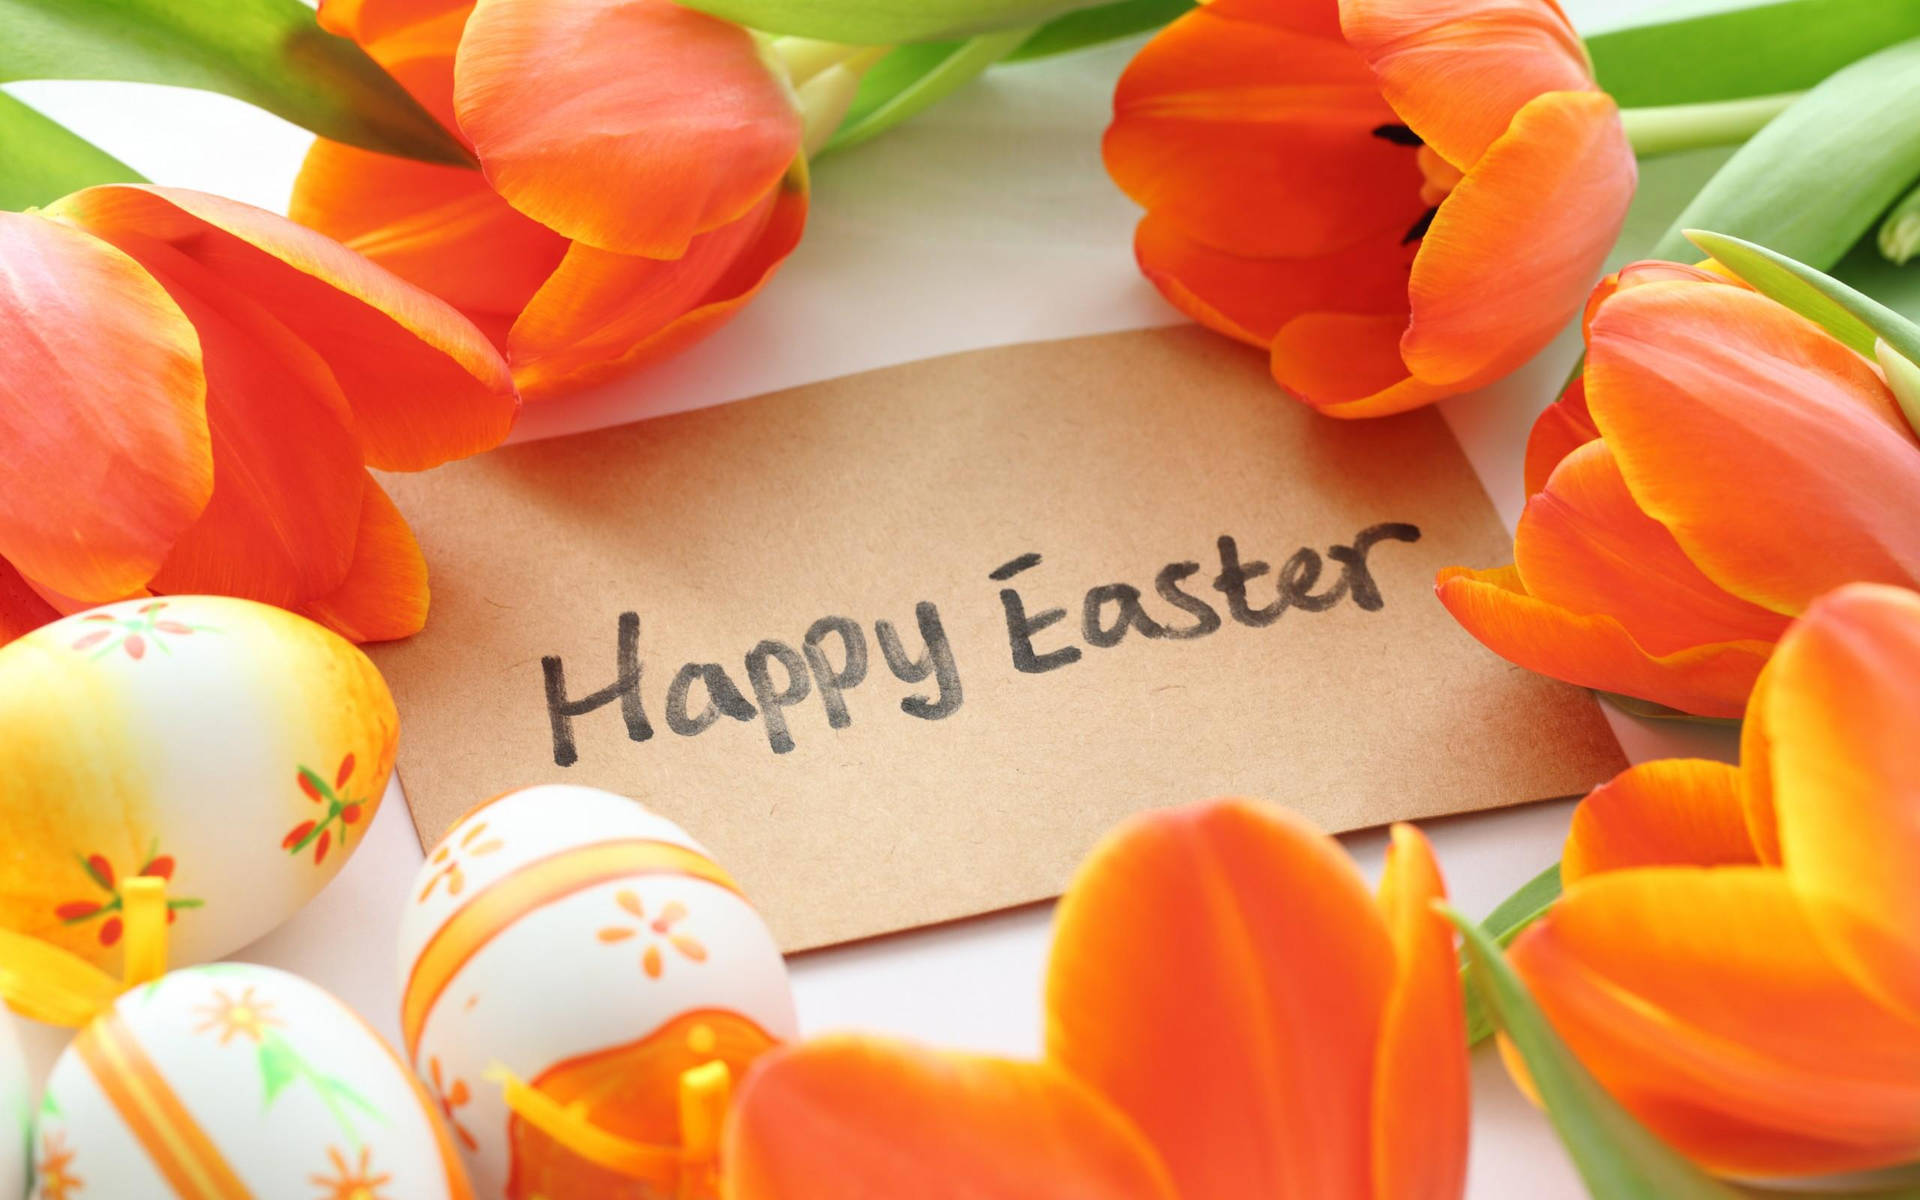 Happy Easter Greeting Card With Orange Tulips Background